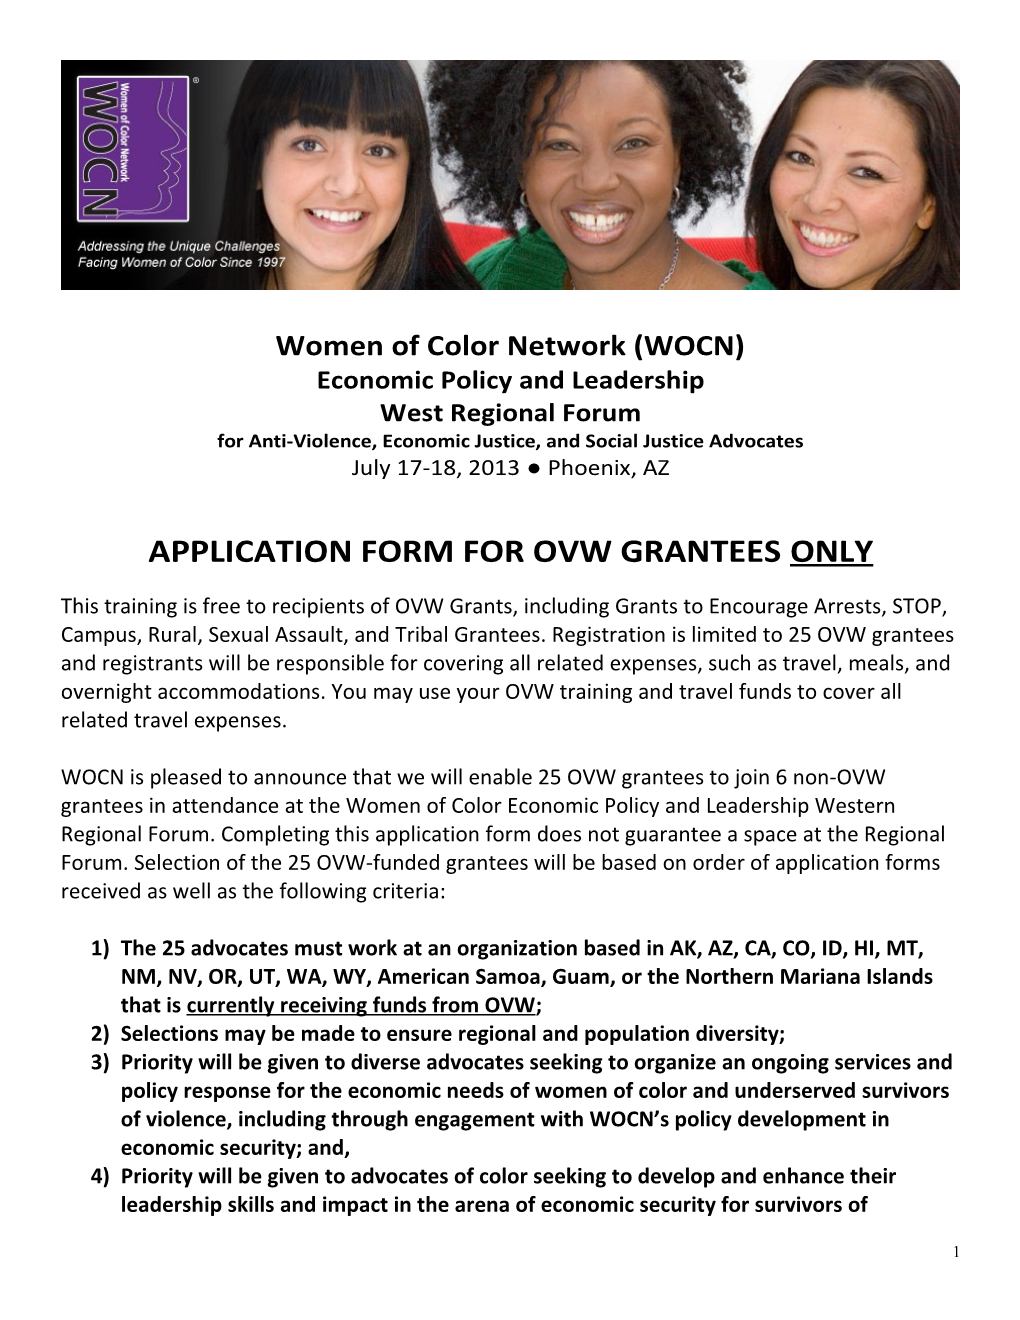 Women of Color Network (WOCN)